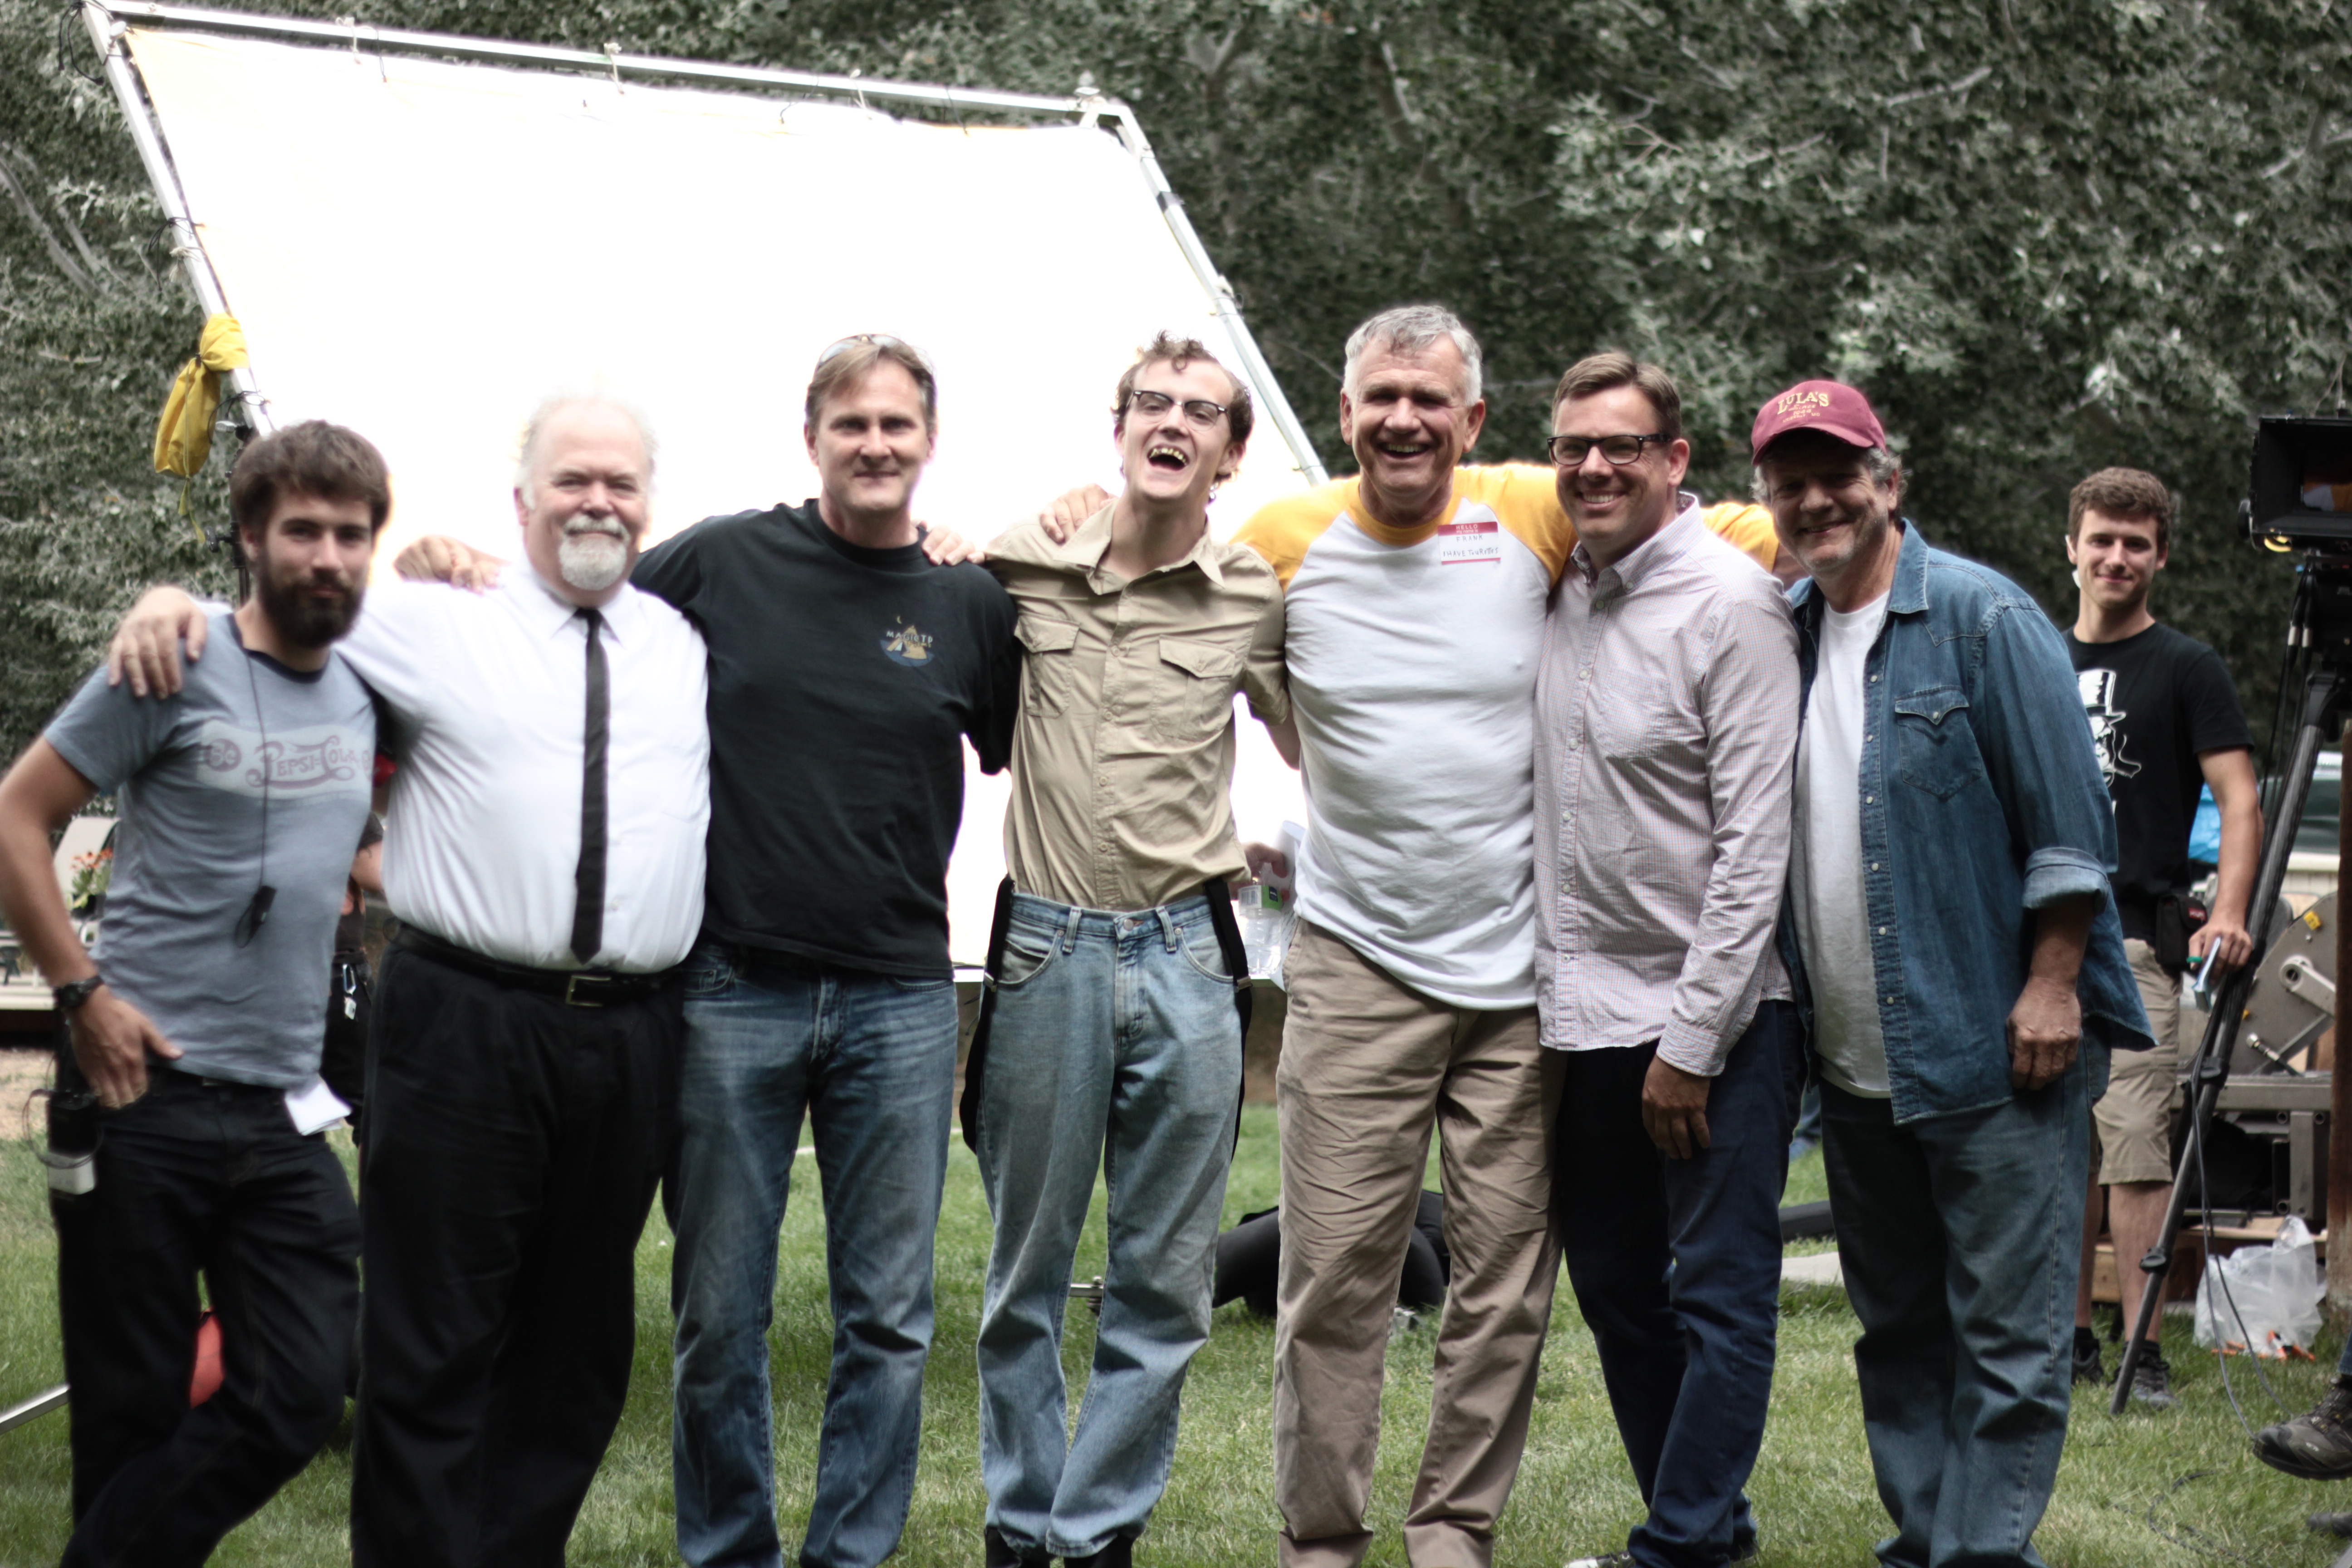 Director Dale Peterson with Actors Wayne DuVall, Brent Briscoe, Garrett M. Brown and the cast and crew of 